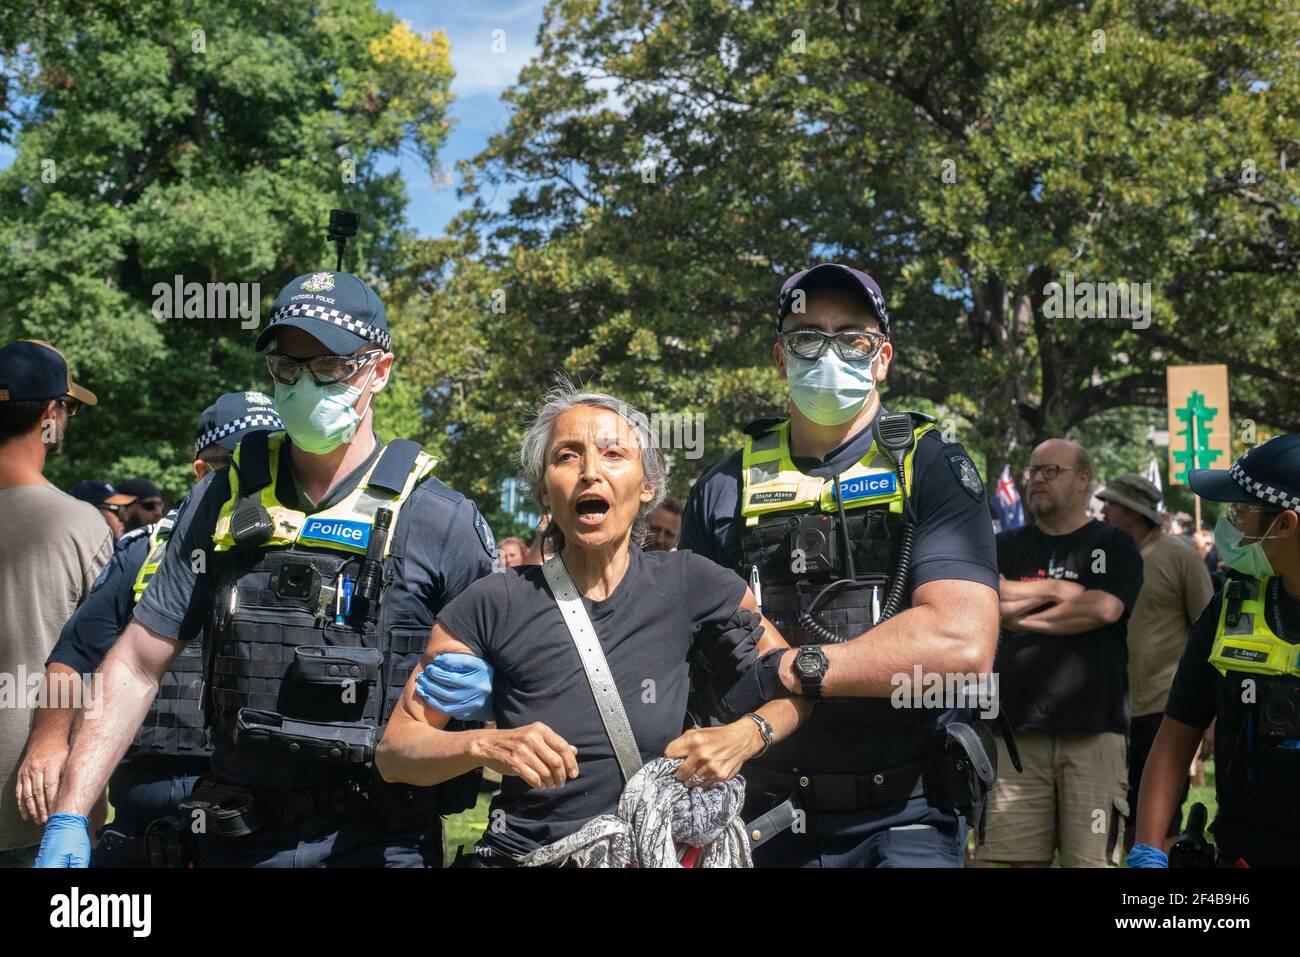 Melbourne, Australia. 20th Mar 2021. A frequent trouble-maker is taken away by police at a worldwide protest for freedom against the COVID-19 vaccination. March 20, Melbourne, Australia. Credit: Jay Kogler/Alamy Live News Stock Photo